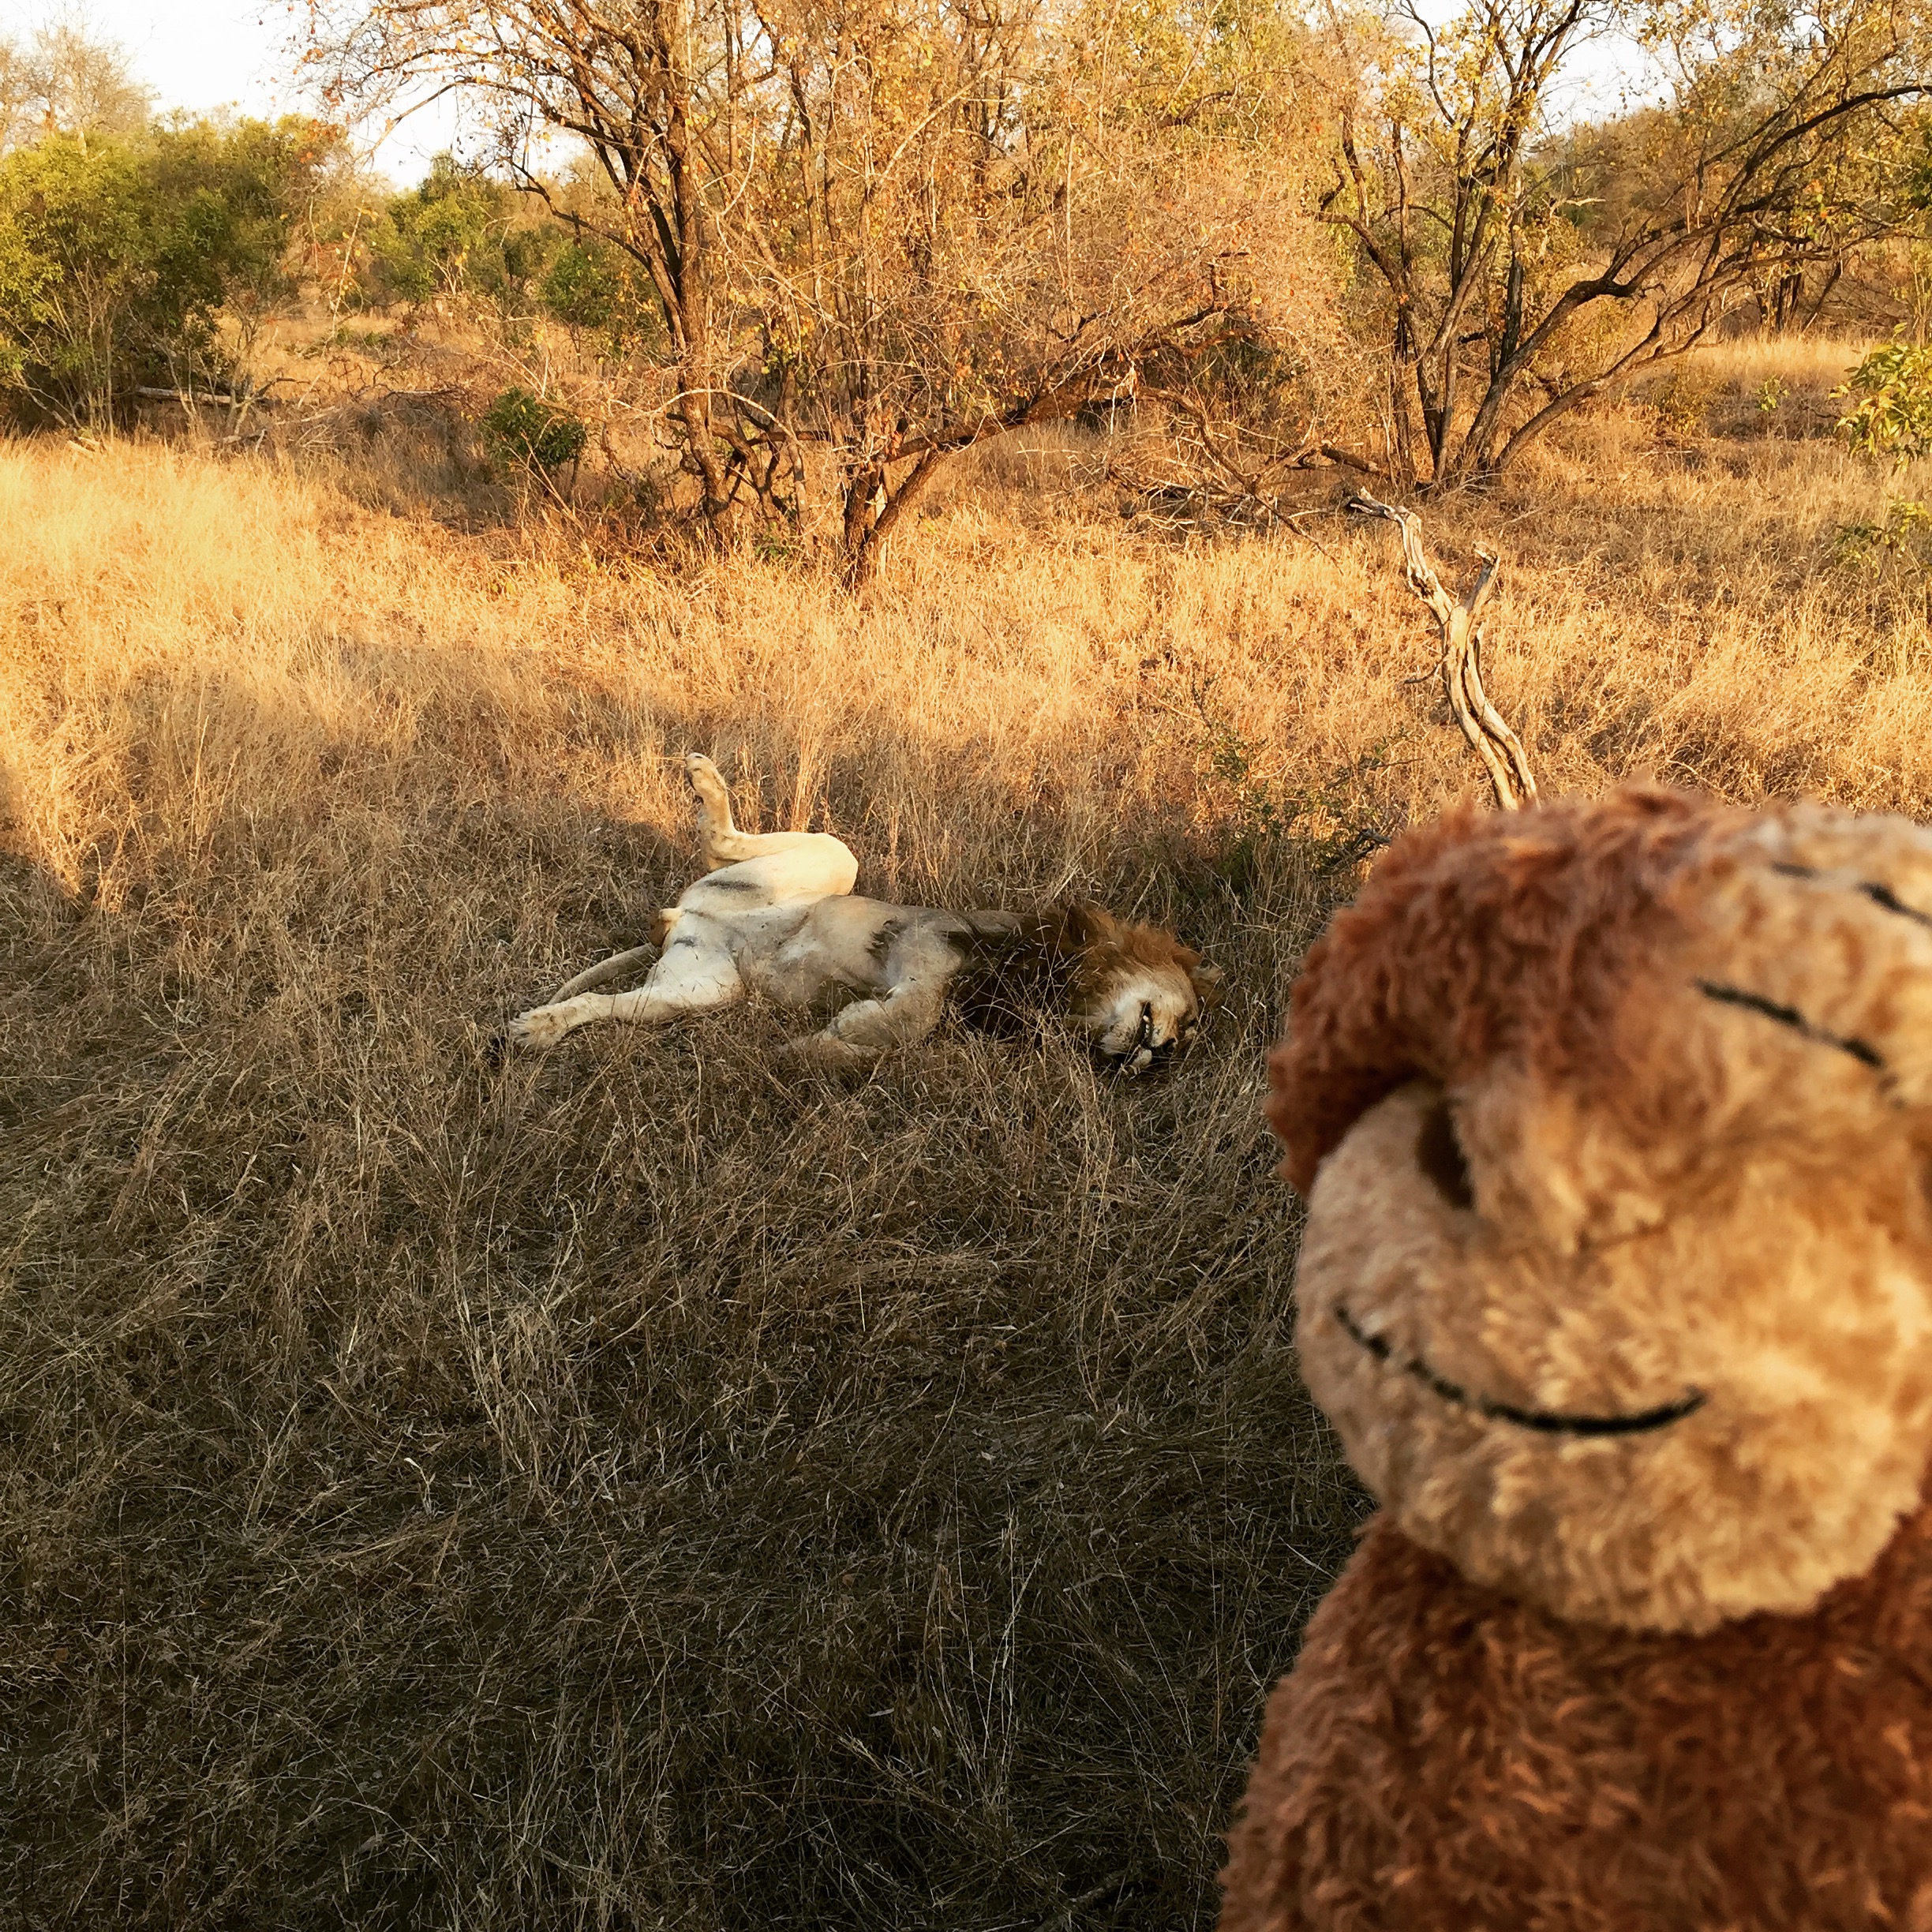 a stuffed toy lying on grass with a dog